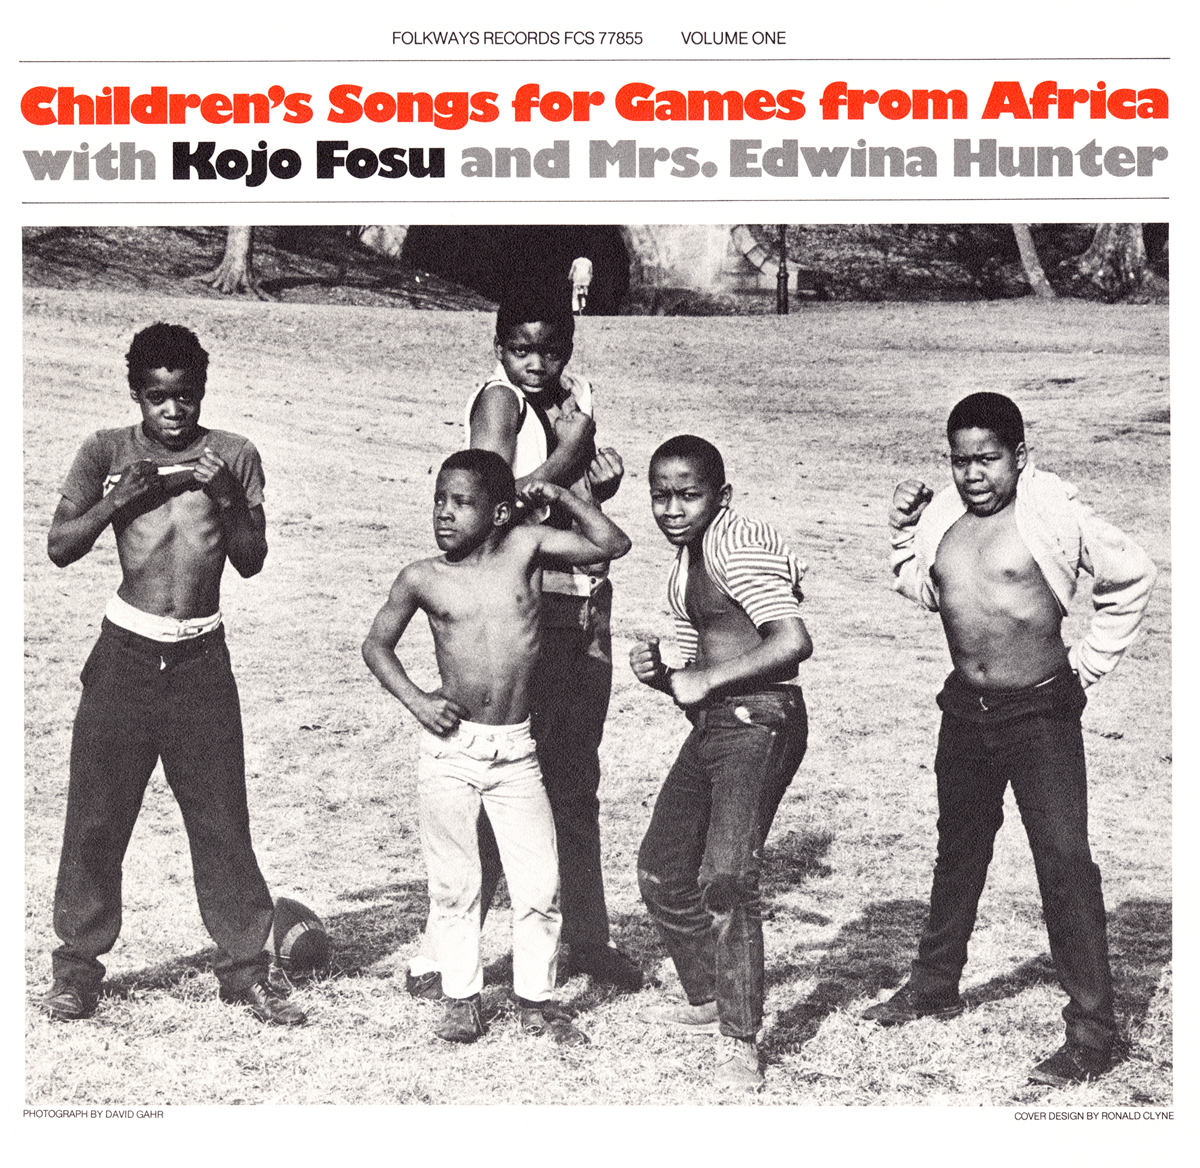 CHILDREN'S SONGS FOR GAMES FROM AFRICA